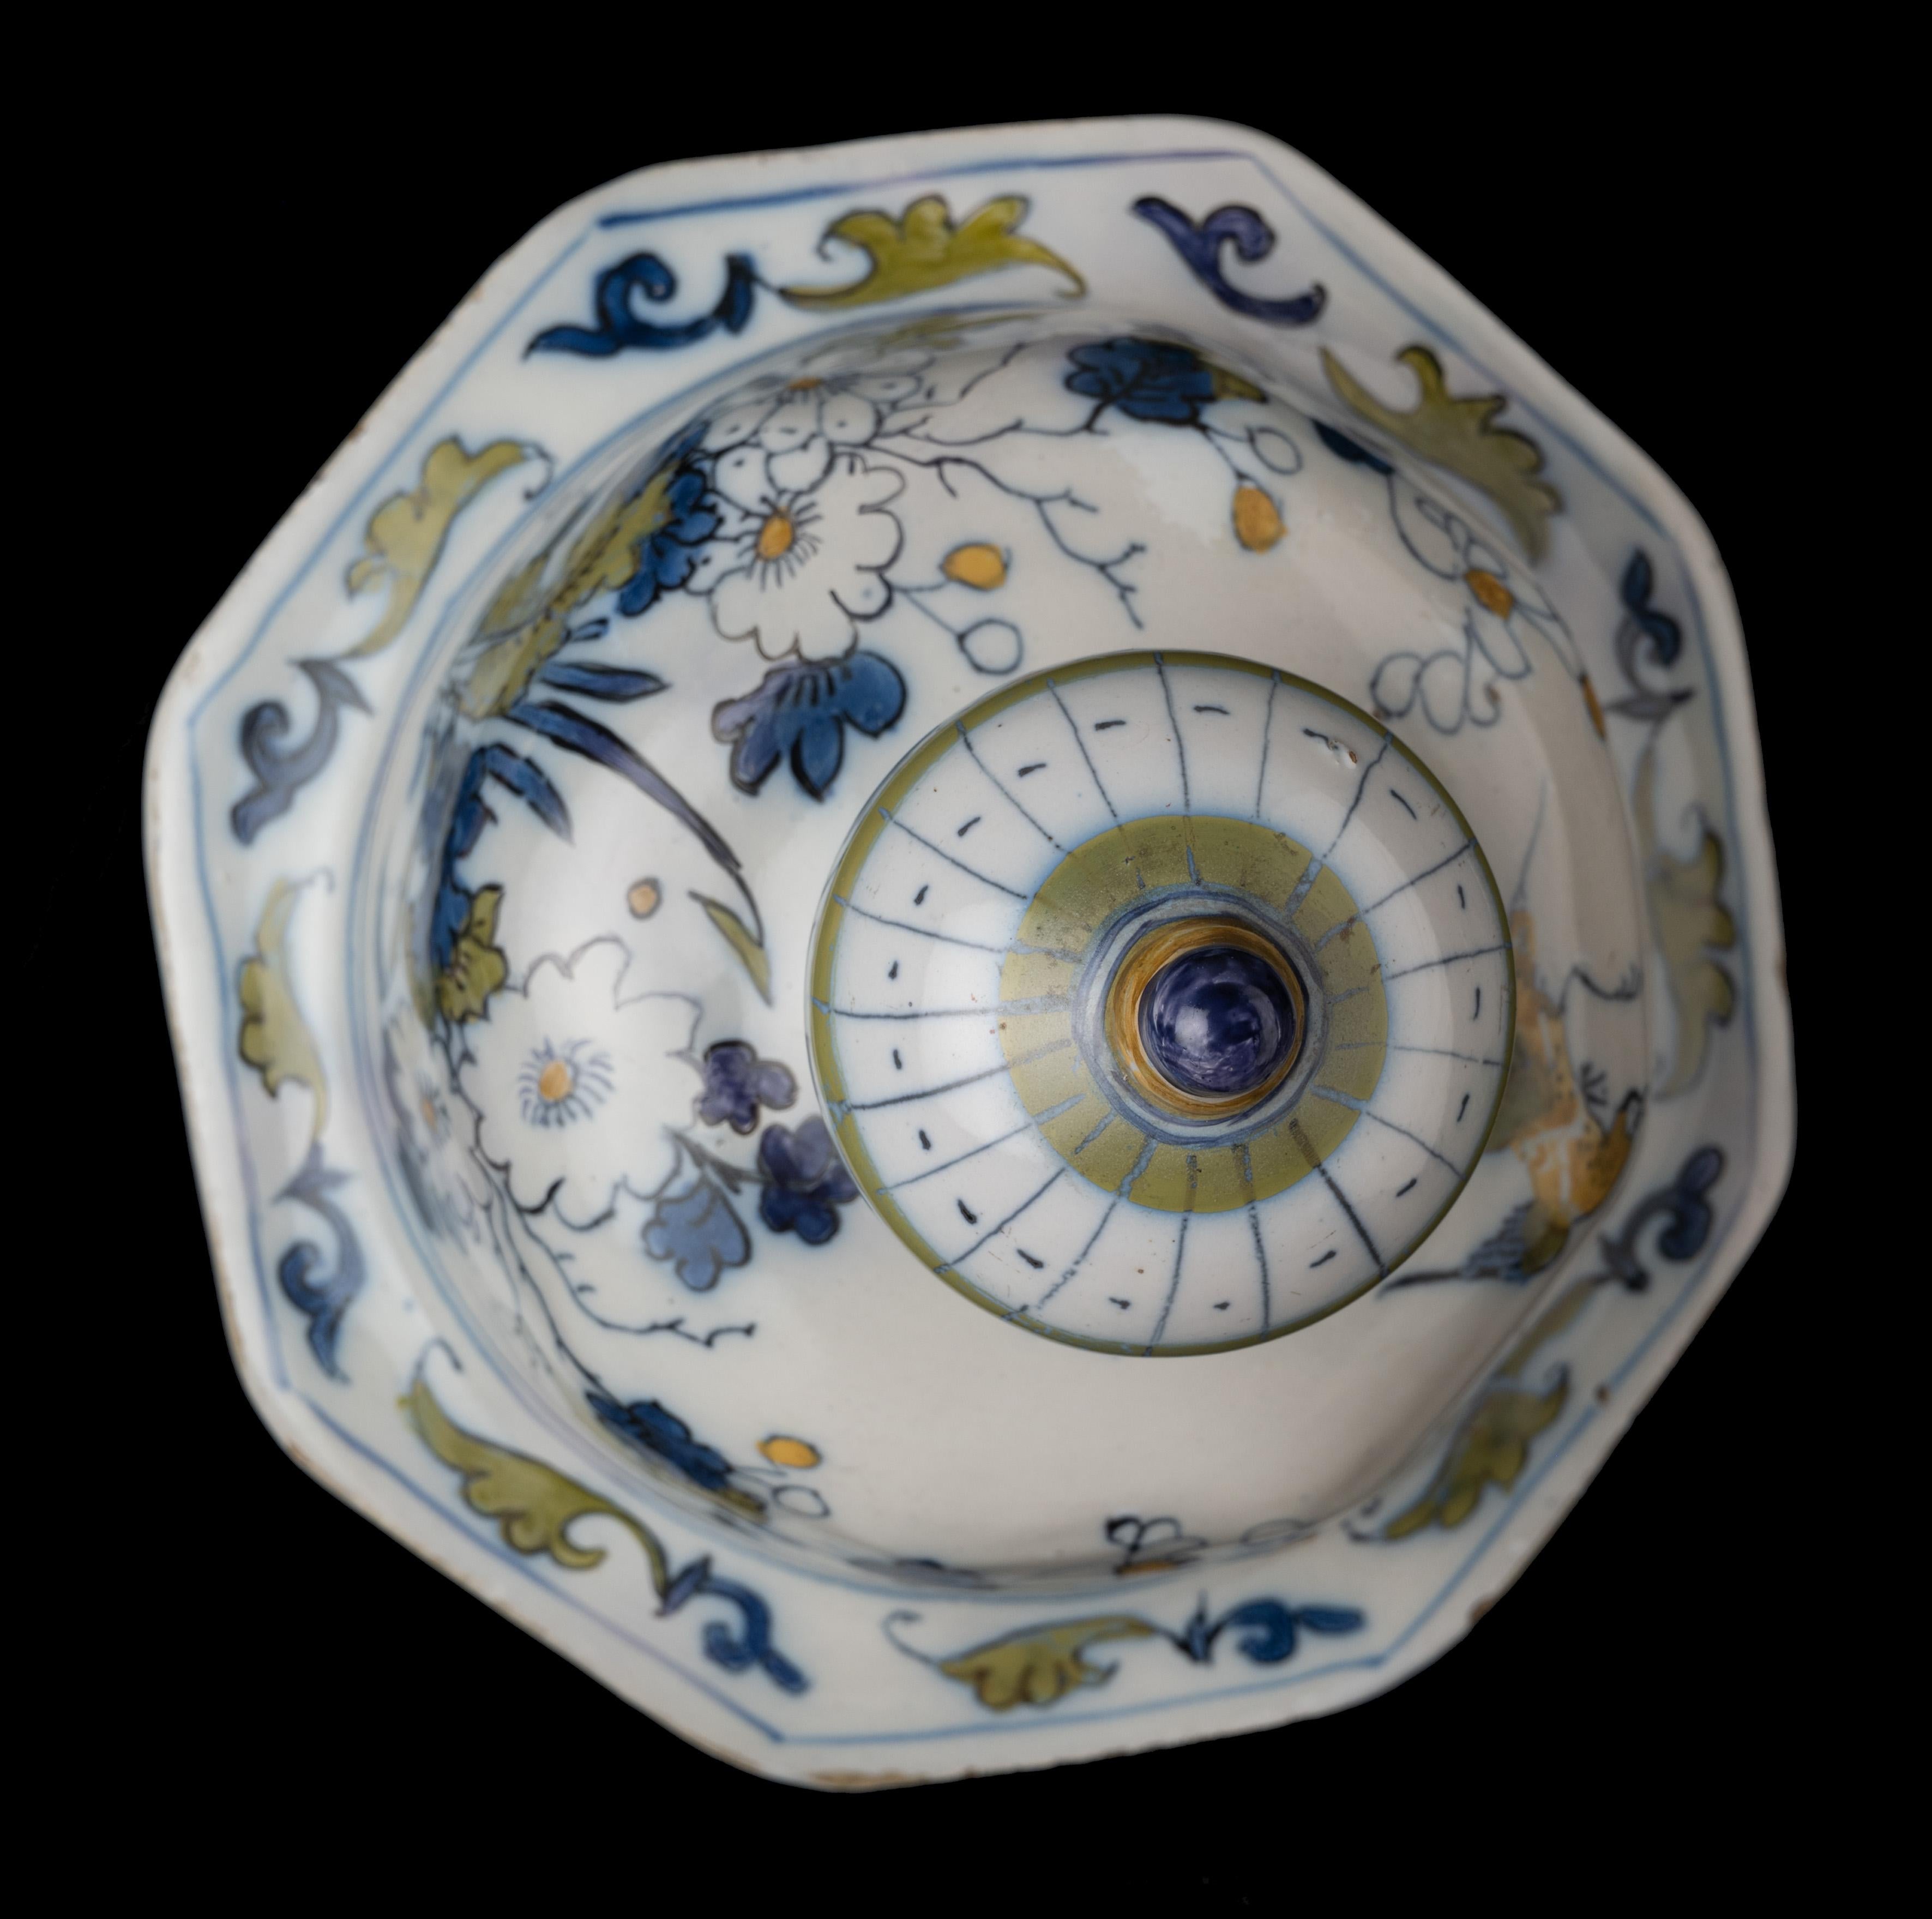 Delft Polychrome Covered Jar with Peacock and Dragon in Landscape, 1690-1700 For Sale 6